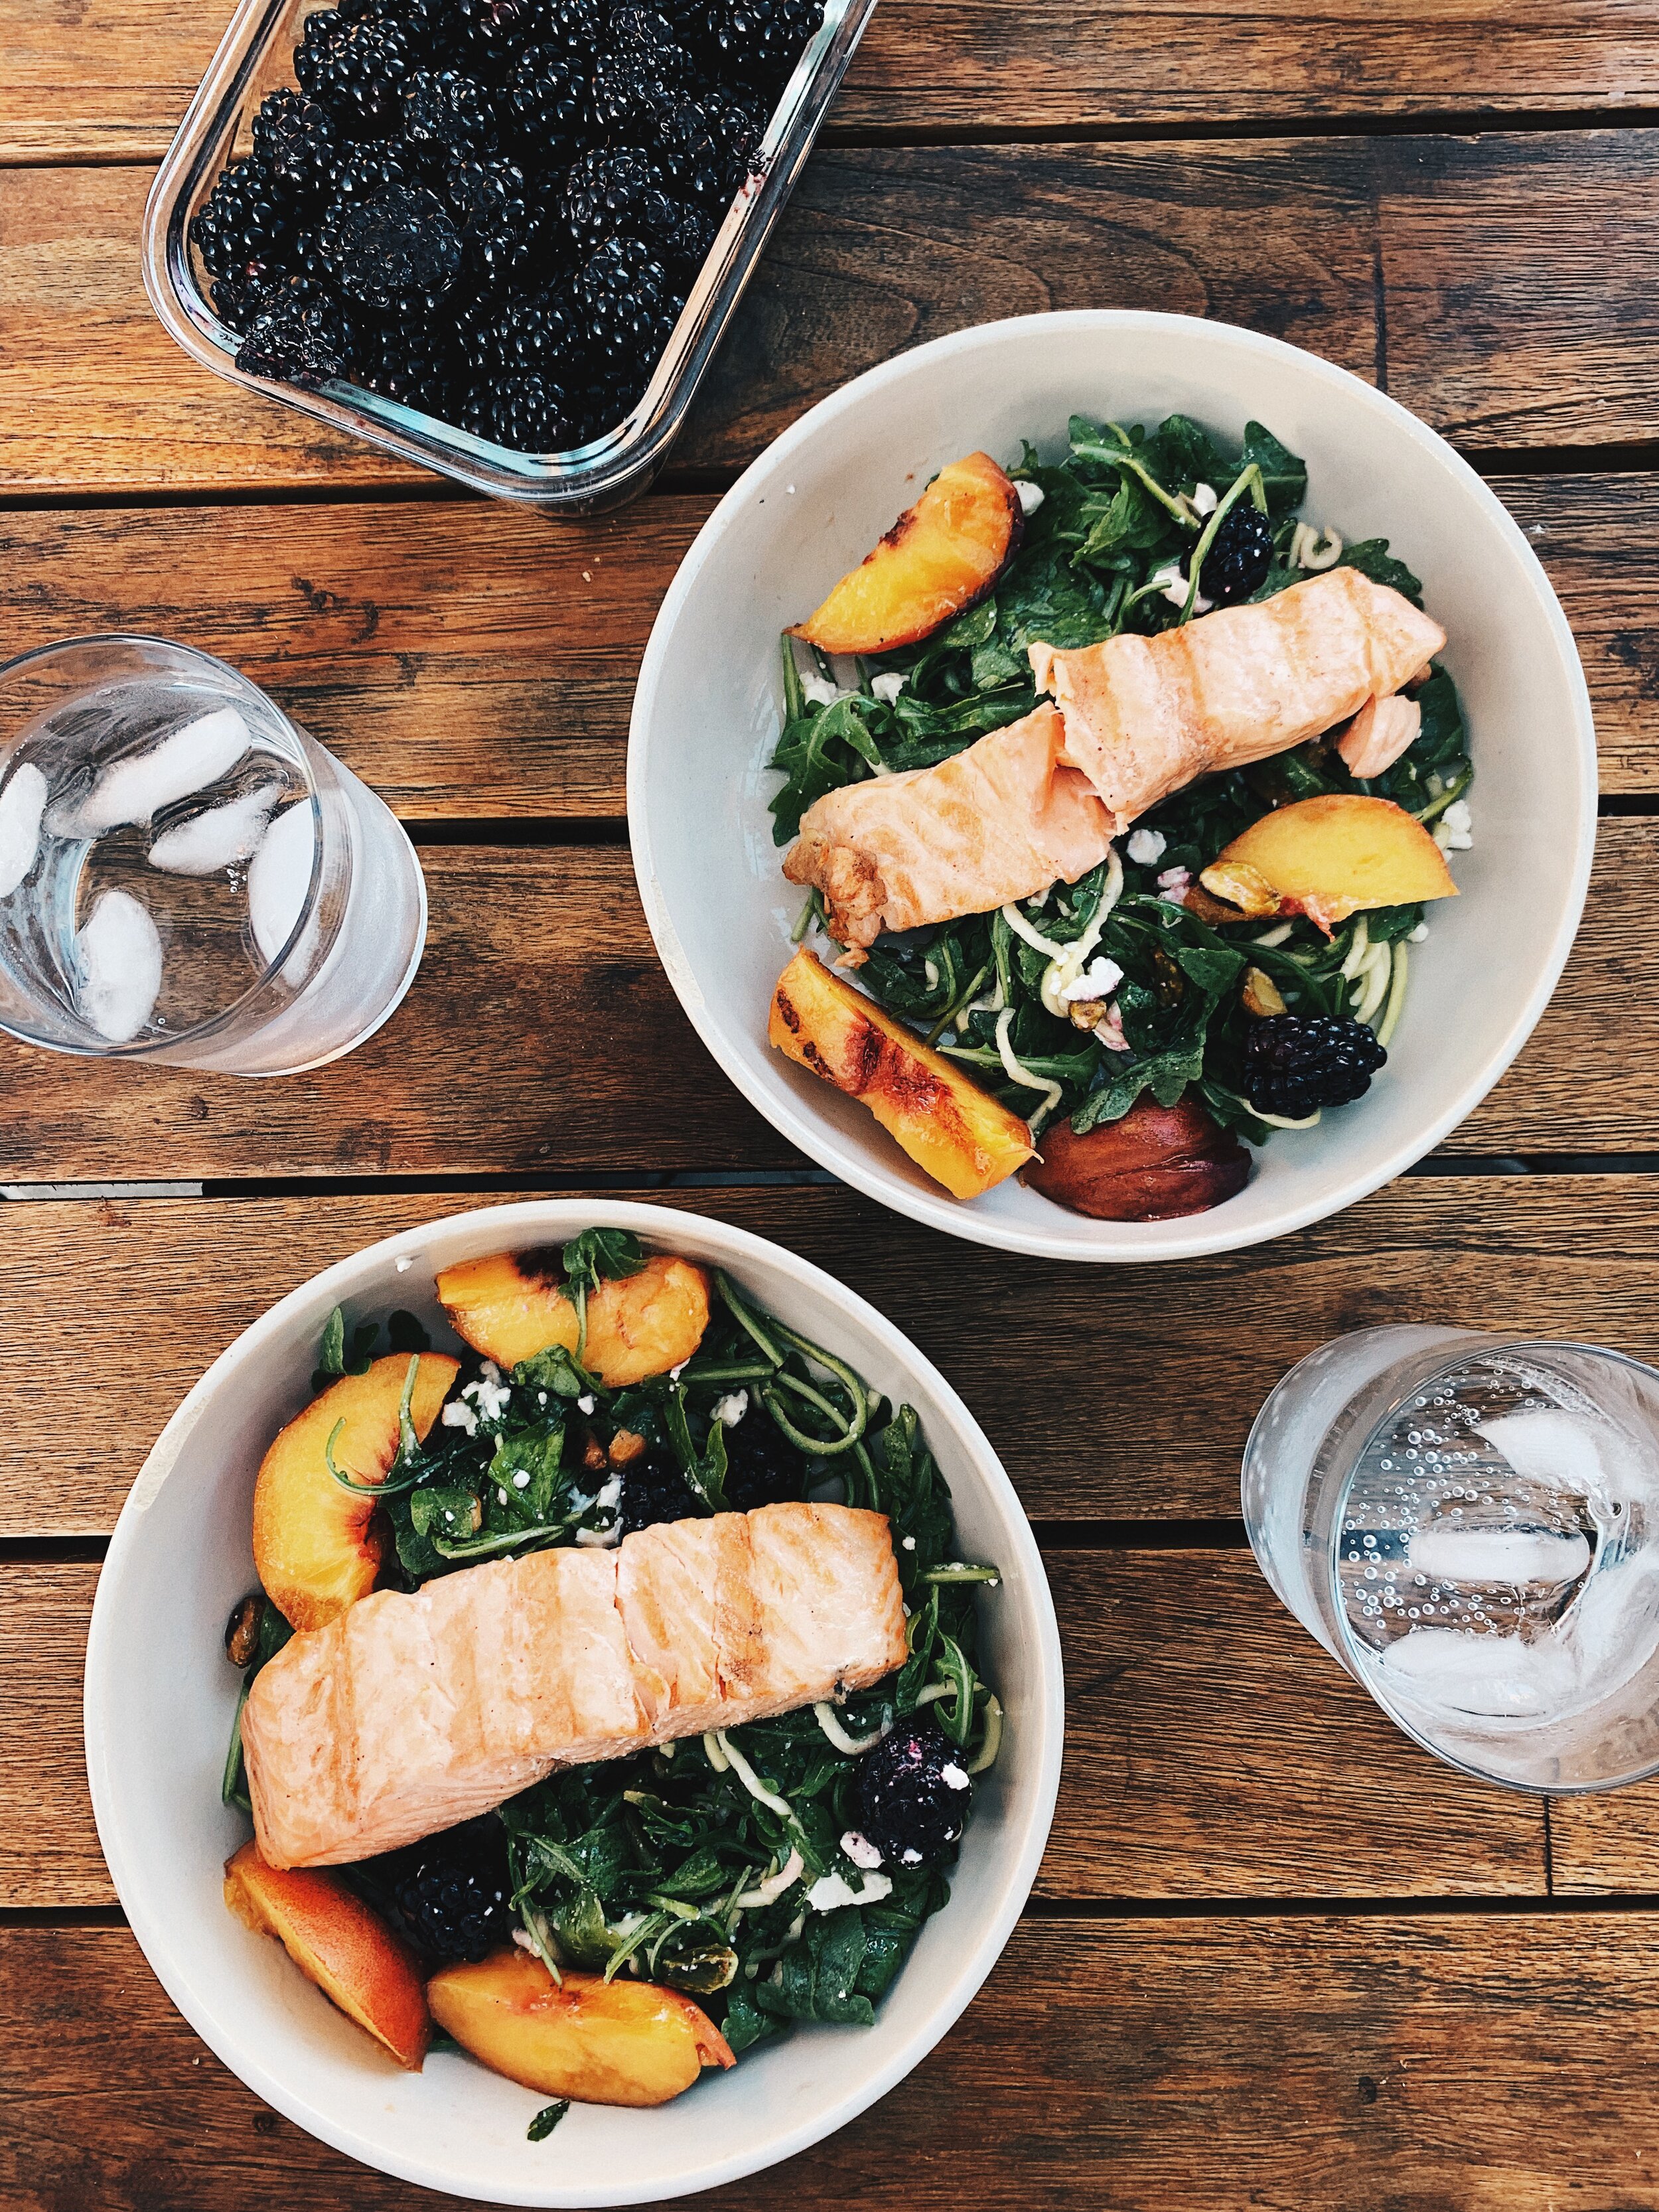 Summer Feasting: 10 Mouthwatering Salmon Recipes to Try